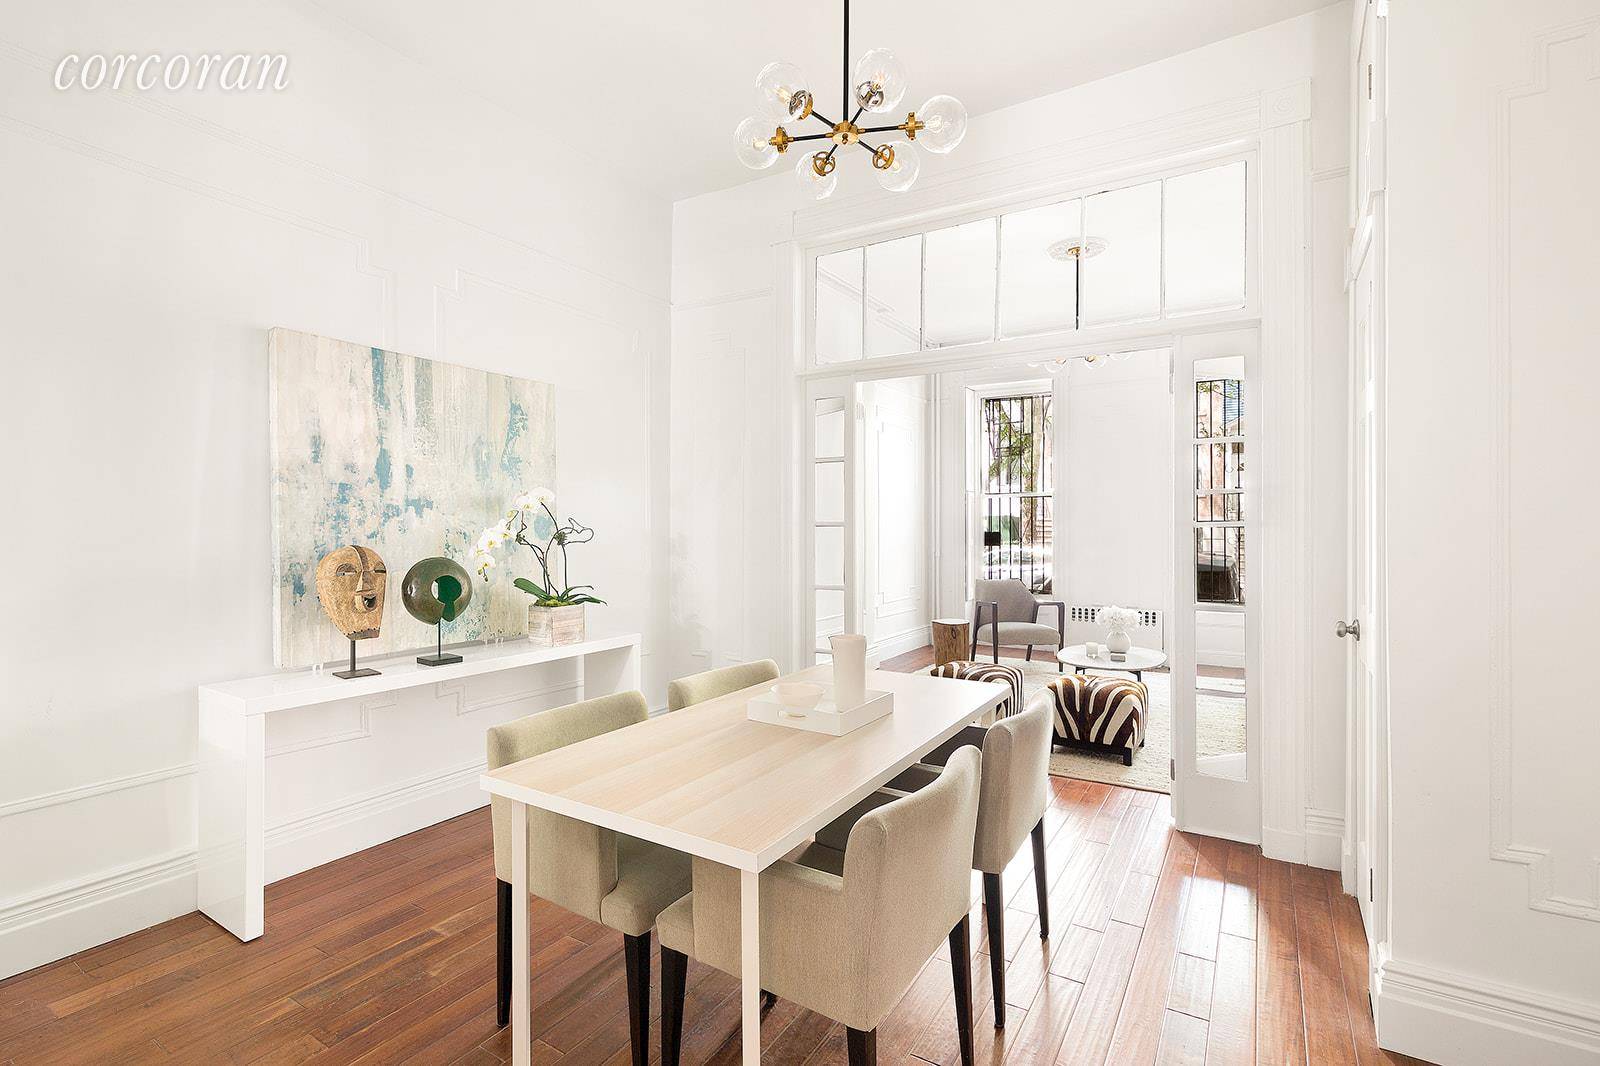 Peaceful sanctuary, light filled and spacious in the heart of North Park Slope.